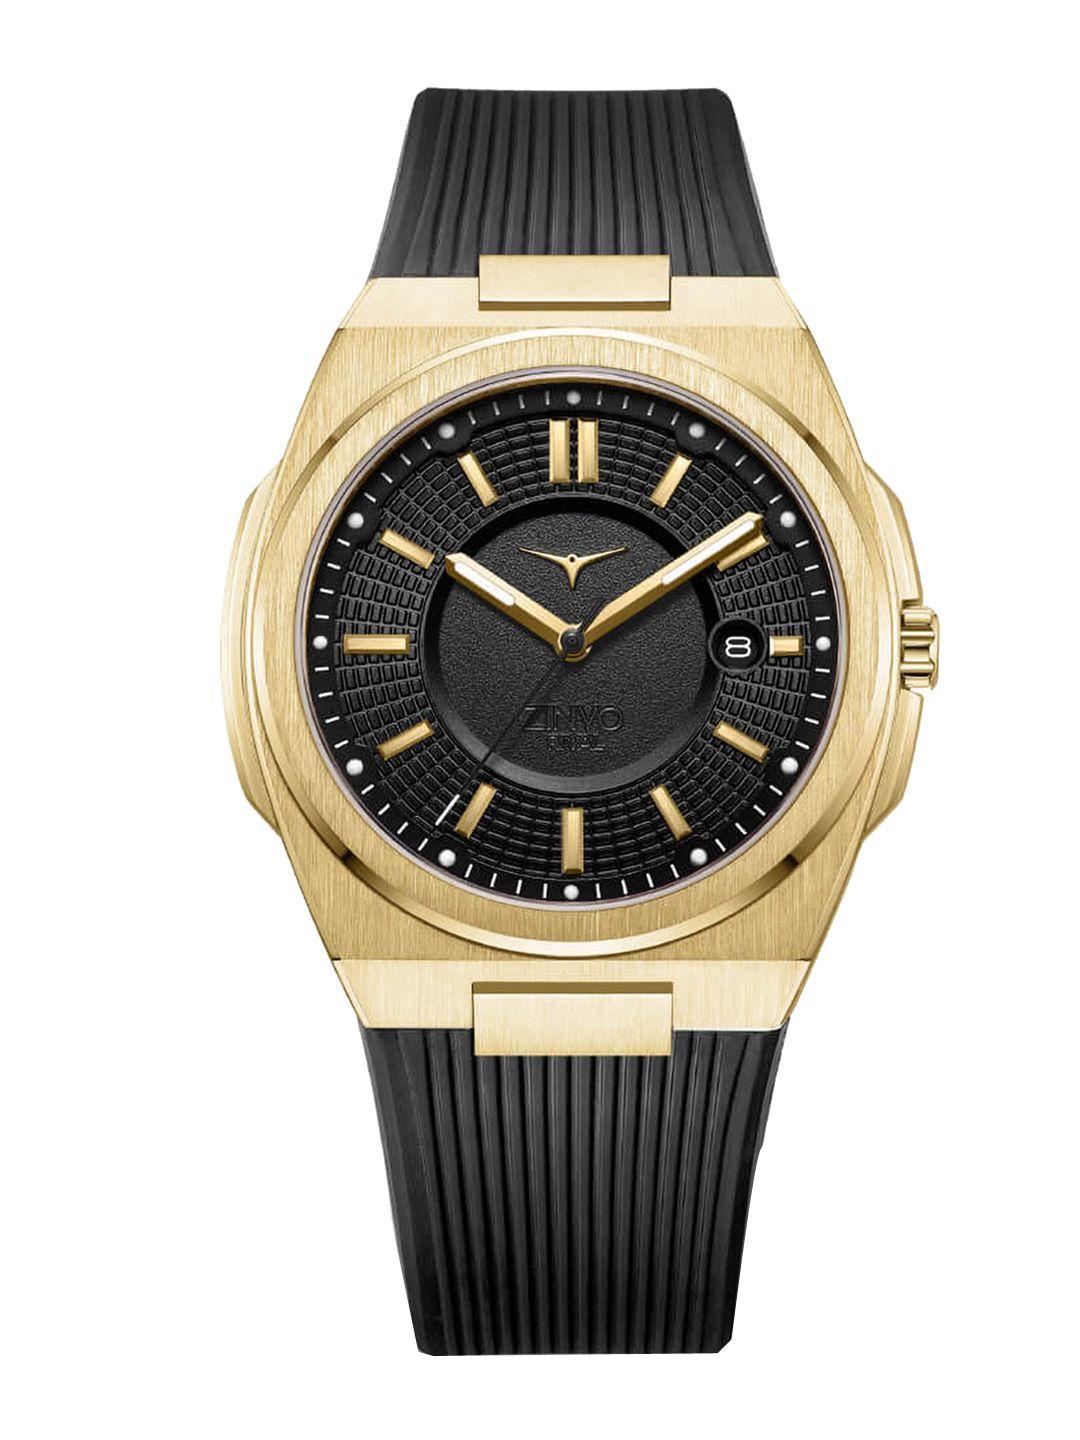 zinvo-men-black-brass-embellished-dial-&-gold-toned-stainless-steel-straps-analogue-watch